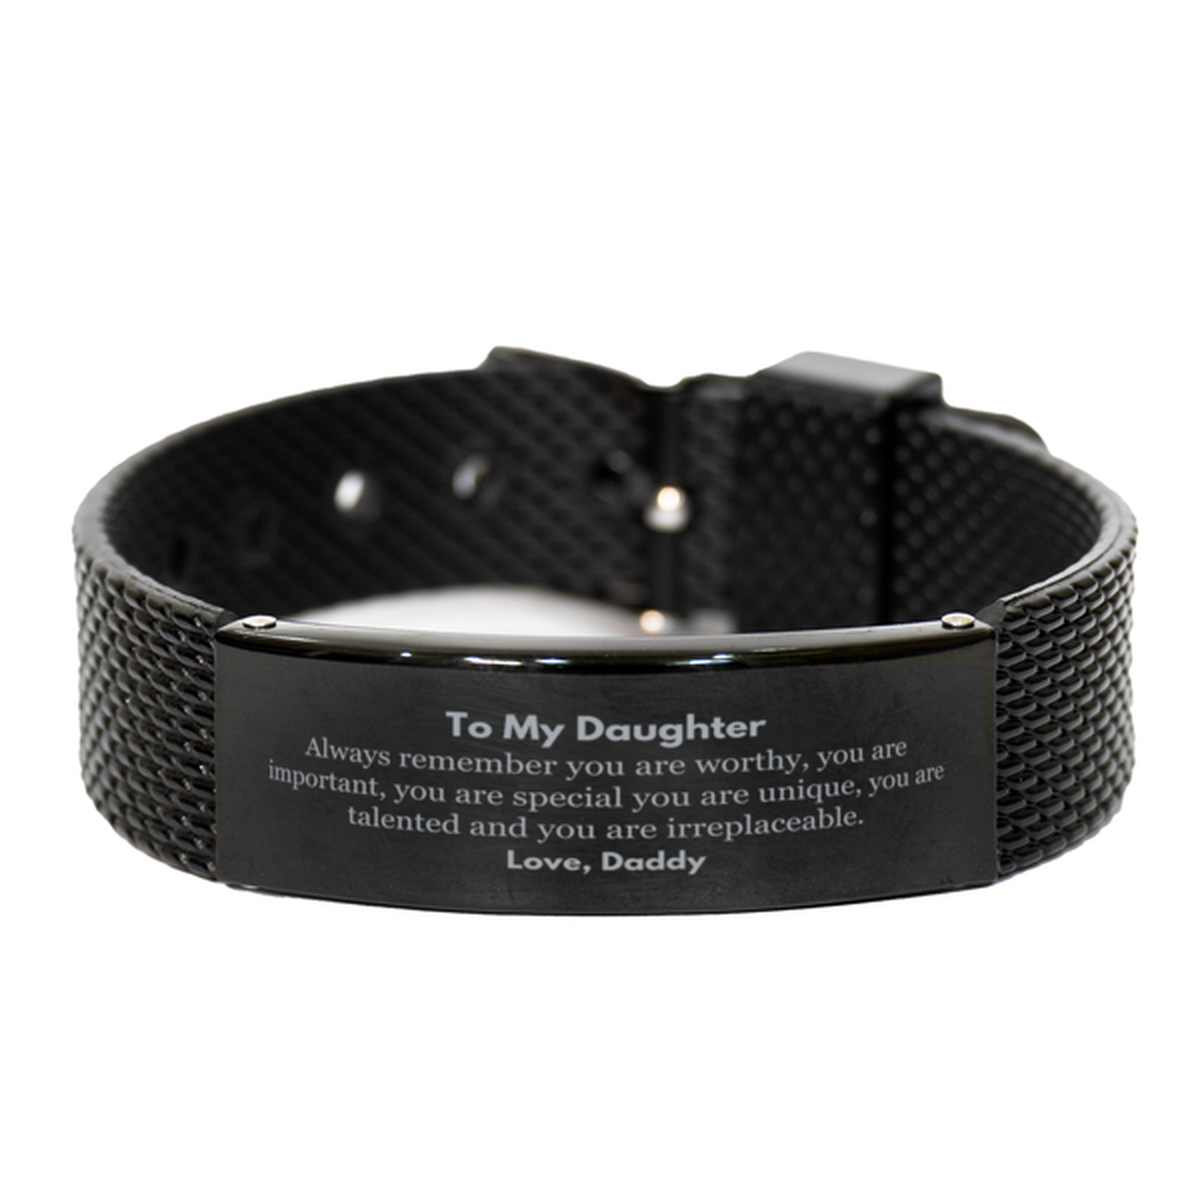 Daughter Birthday Gifts from Daddy, Inspirational Black Shark Mesh Bracelet for Daughter Christmas Graduation Gifts for Daughter Always remember you are worthy, you are important. Love, Daddy